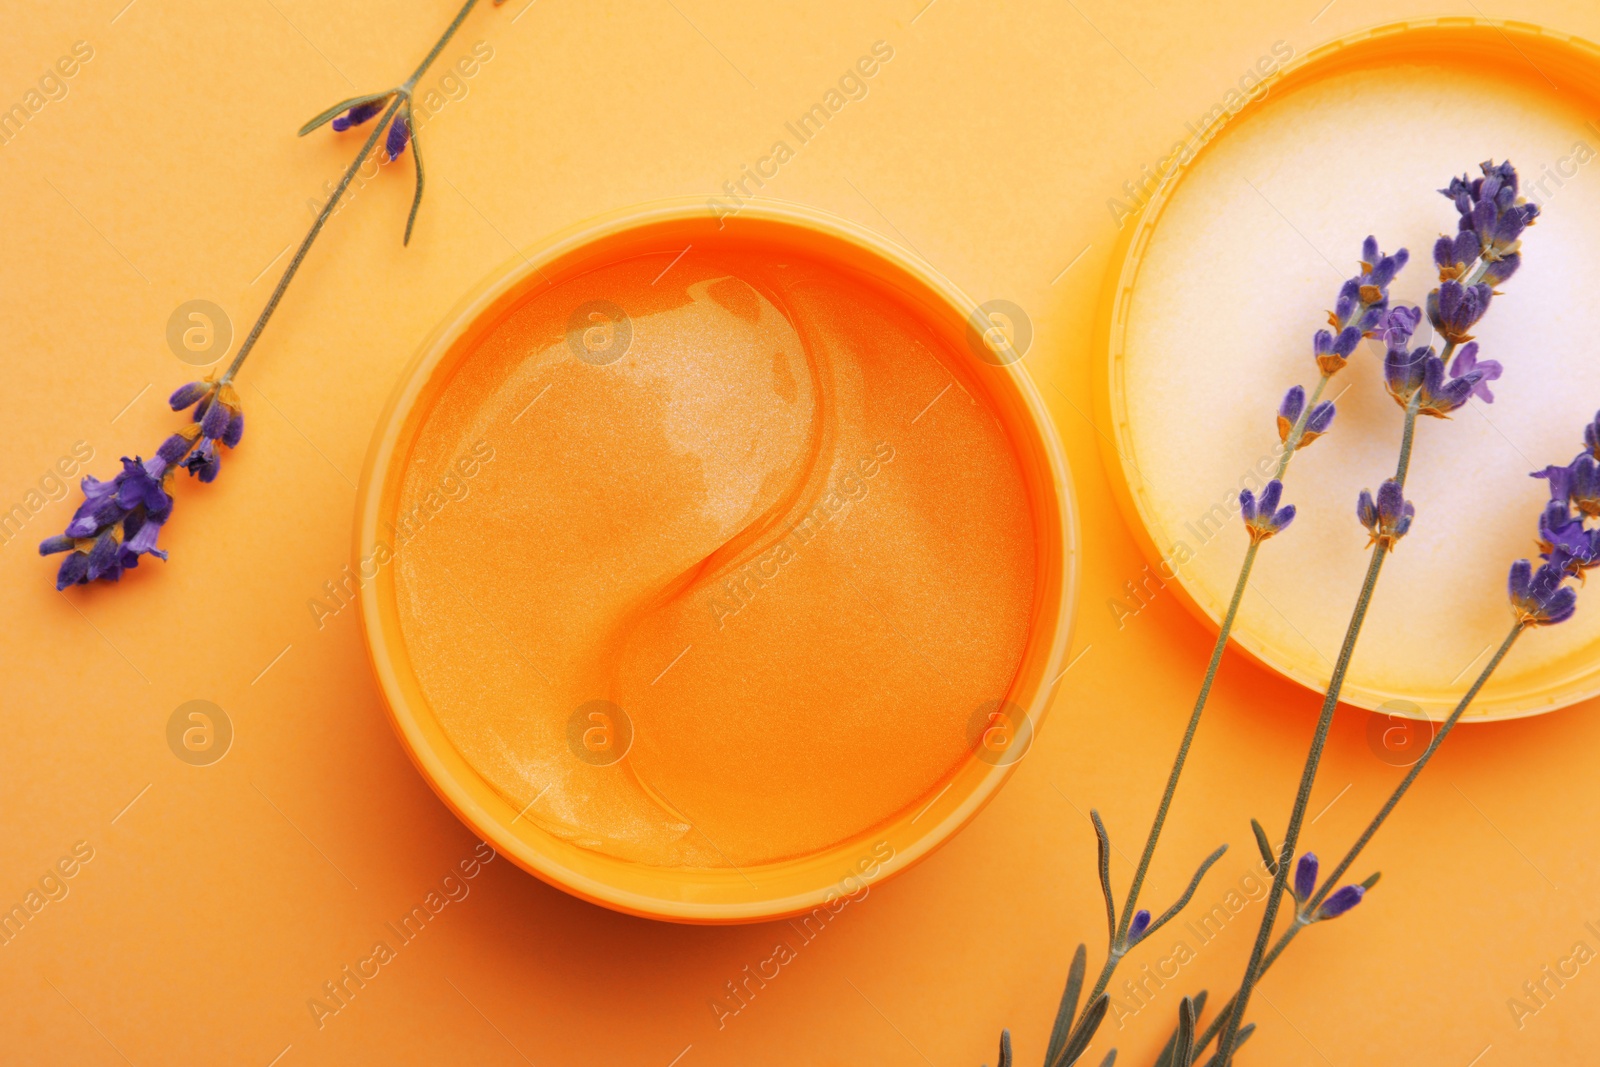 Image of Package of under eye patches and lavender flowers on orange background, flat lay. Cosmetic product